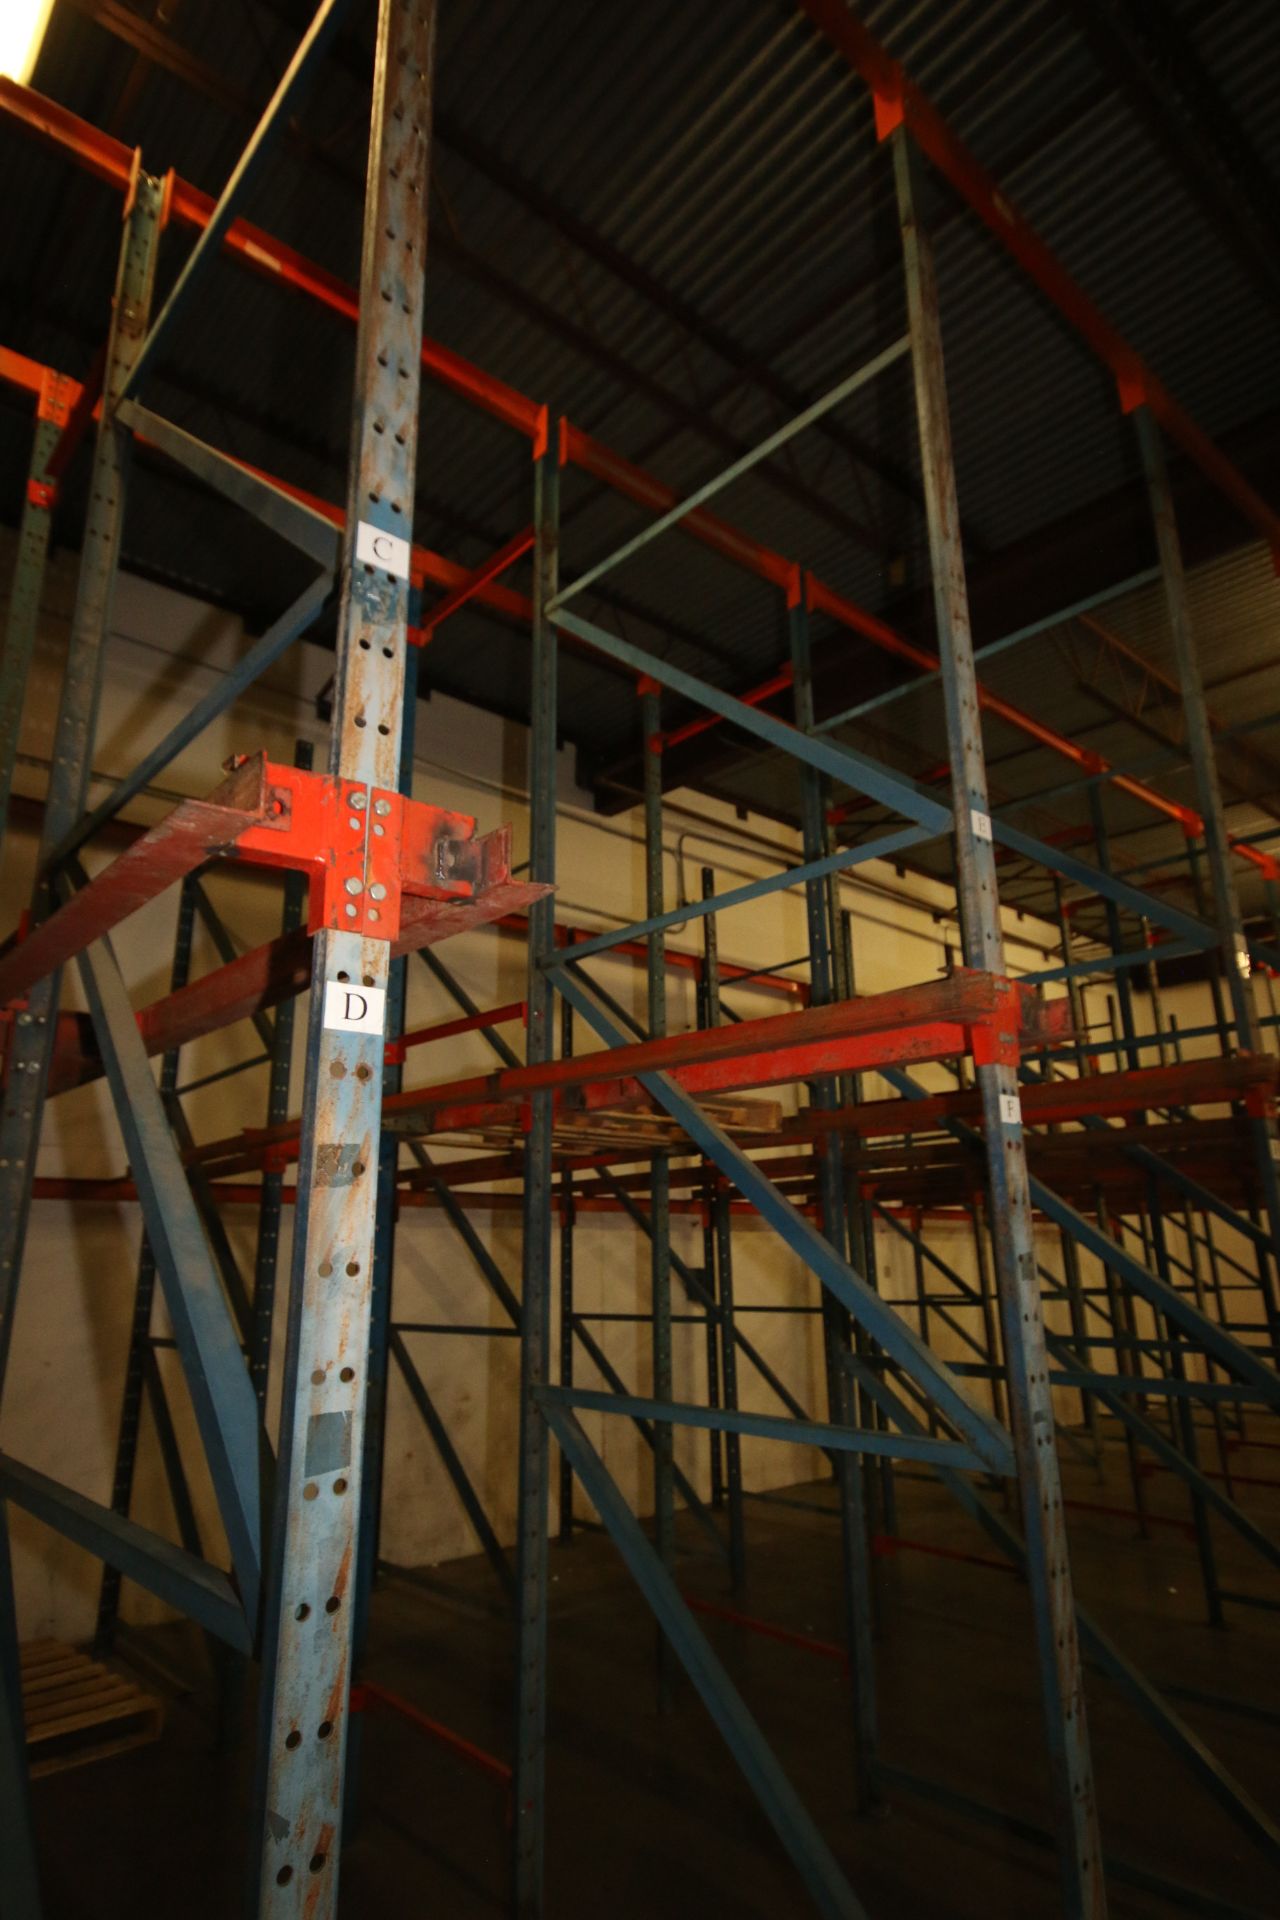 10-Sections of Pallet Racking, with 14' Uprights and Bolted Cross Beams, Overall Dims.: Aprox. 44' L - Image 3 of 3